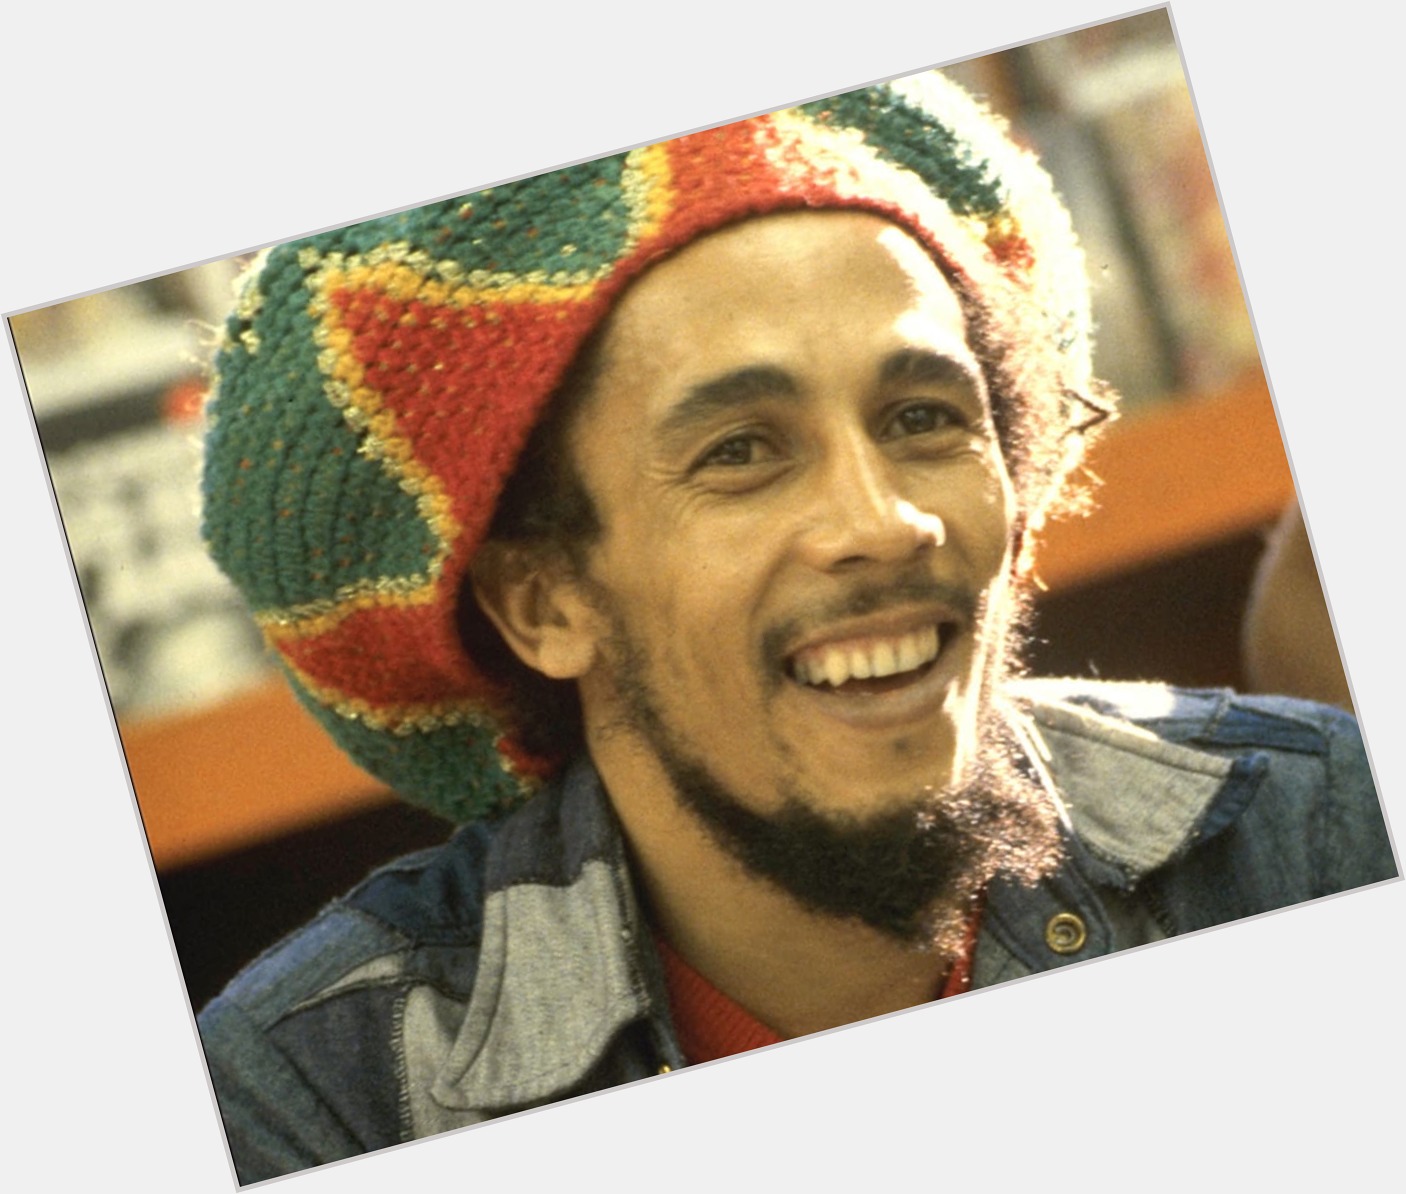 \"Some people are so poor, all they have is money.\"

Happy birthday, Bob Marley 